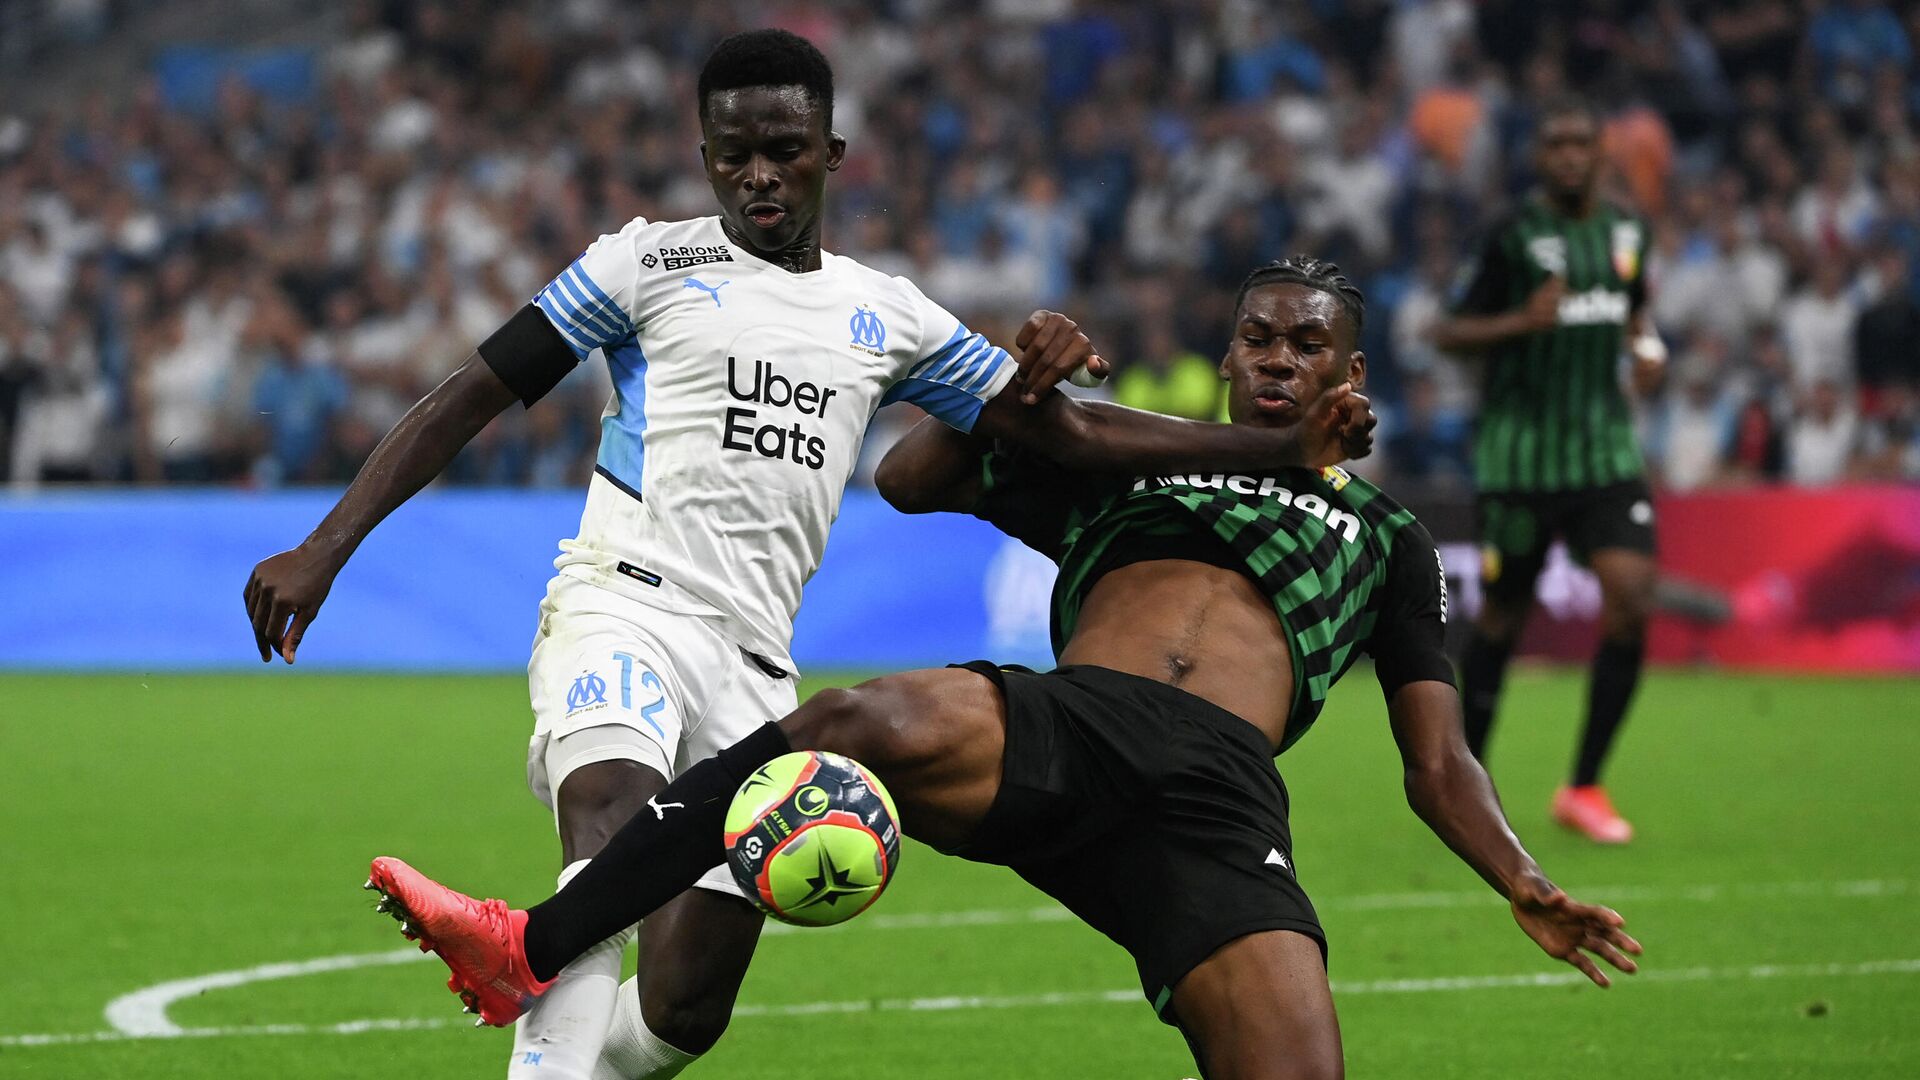 Marseille's Senegalese forward Bamba Dieng is tackled in the penalty area by Lens' French defender Christopher Maurice Wooh and obtains a penalty during the French L1 football match between Olympique Marseille (OM) and RC Lens at Stade Velodrome in Marseille, southern France on September 26, 2021. (Photo by Christophe SIMON / AFP) - РИА Новости, 1920, 27.09.2021